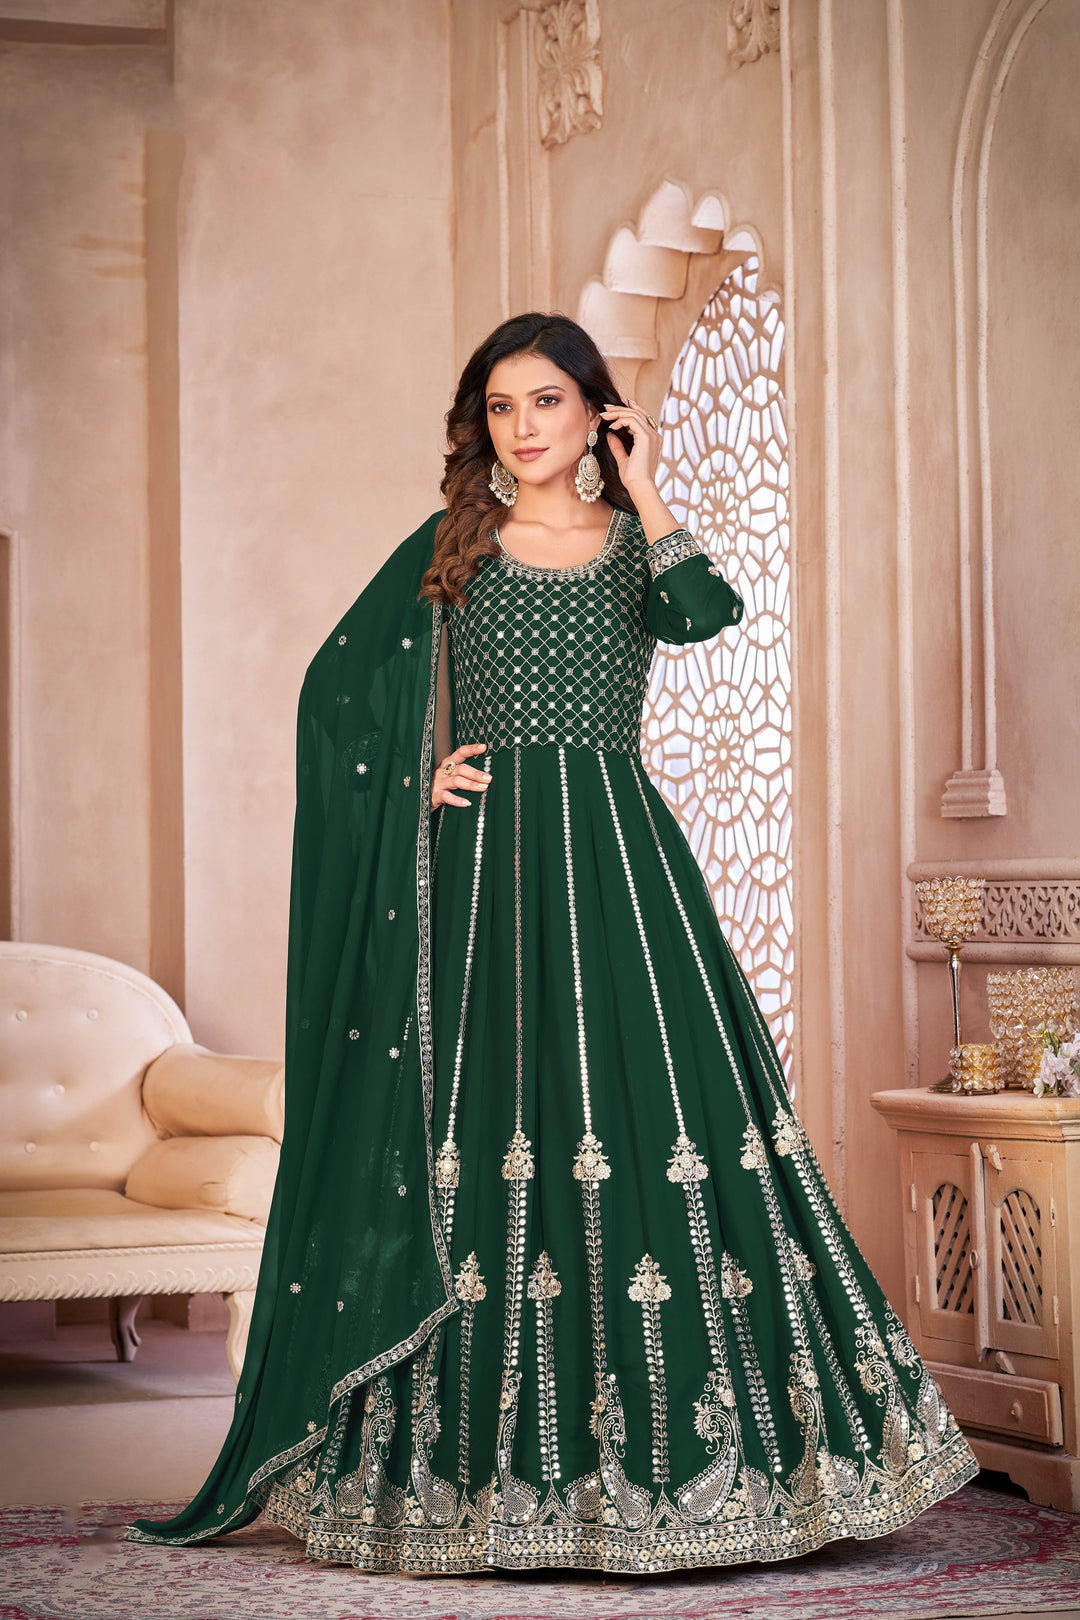 Elegant Green Faux Georgette Gown: Perfect for Weddings and Parties!